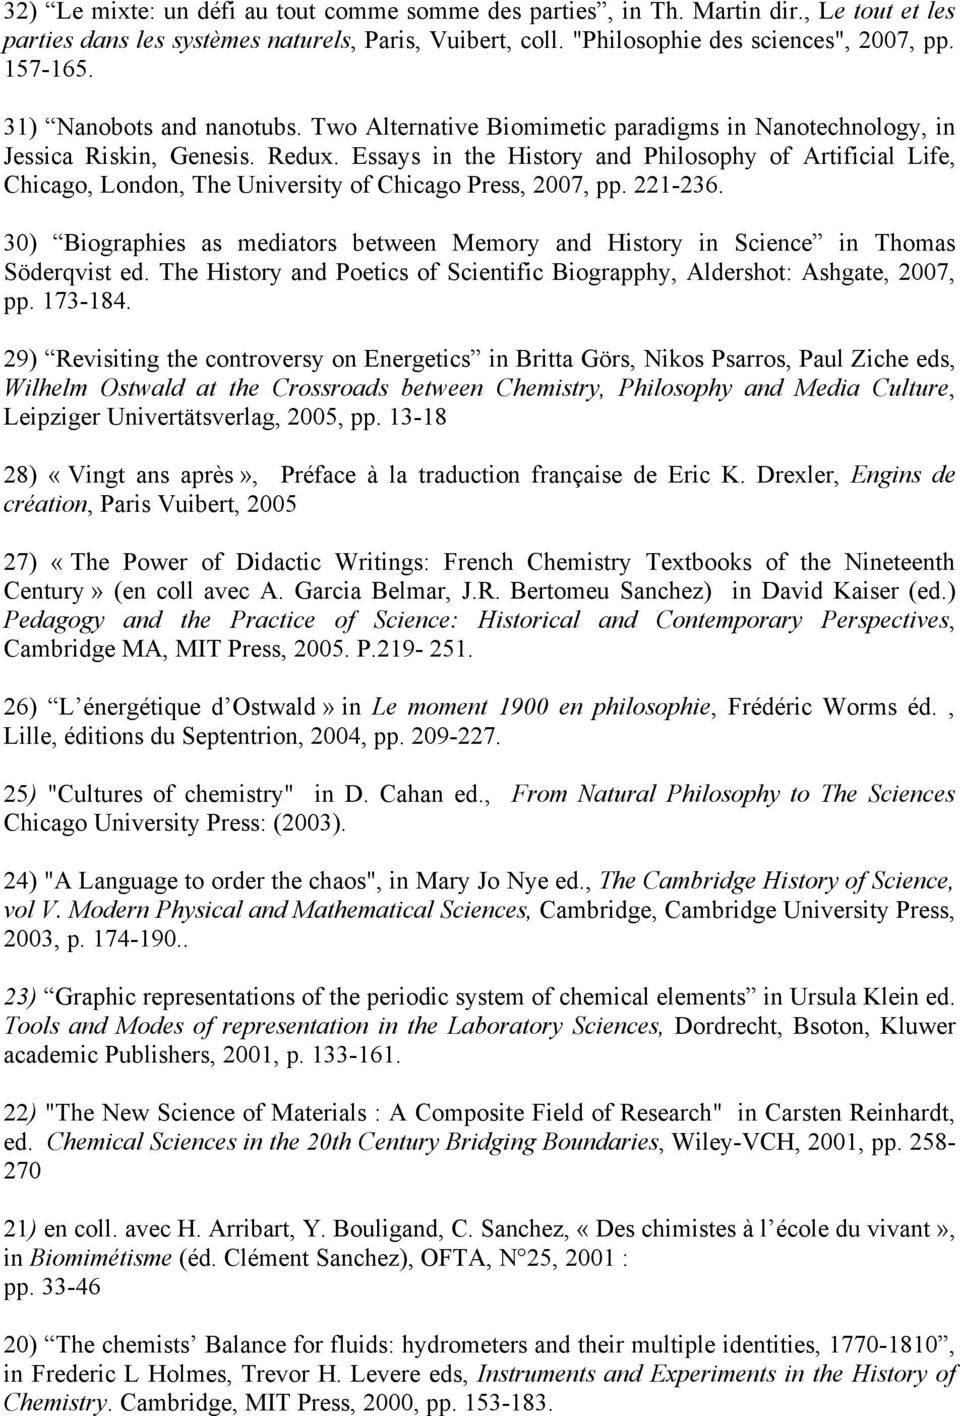 Essays in the History and Philosophy of Artificial Life, Chicago, London, The University of Chicago Press, 2007, pp. 221-236.